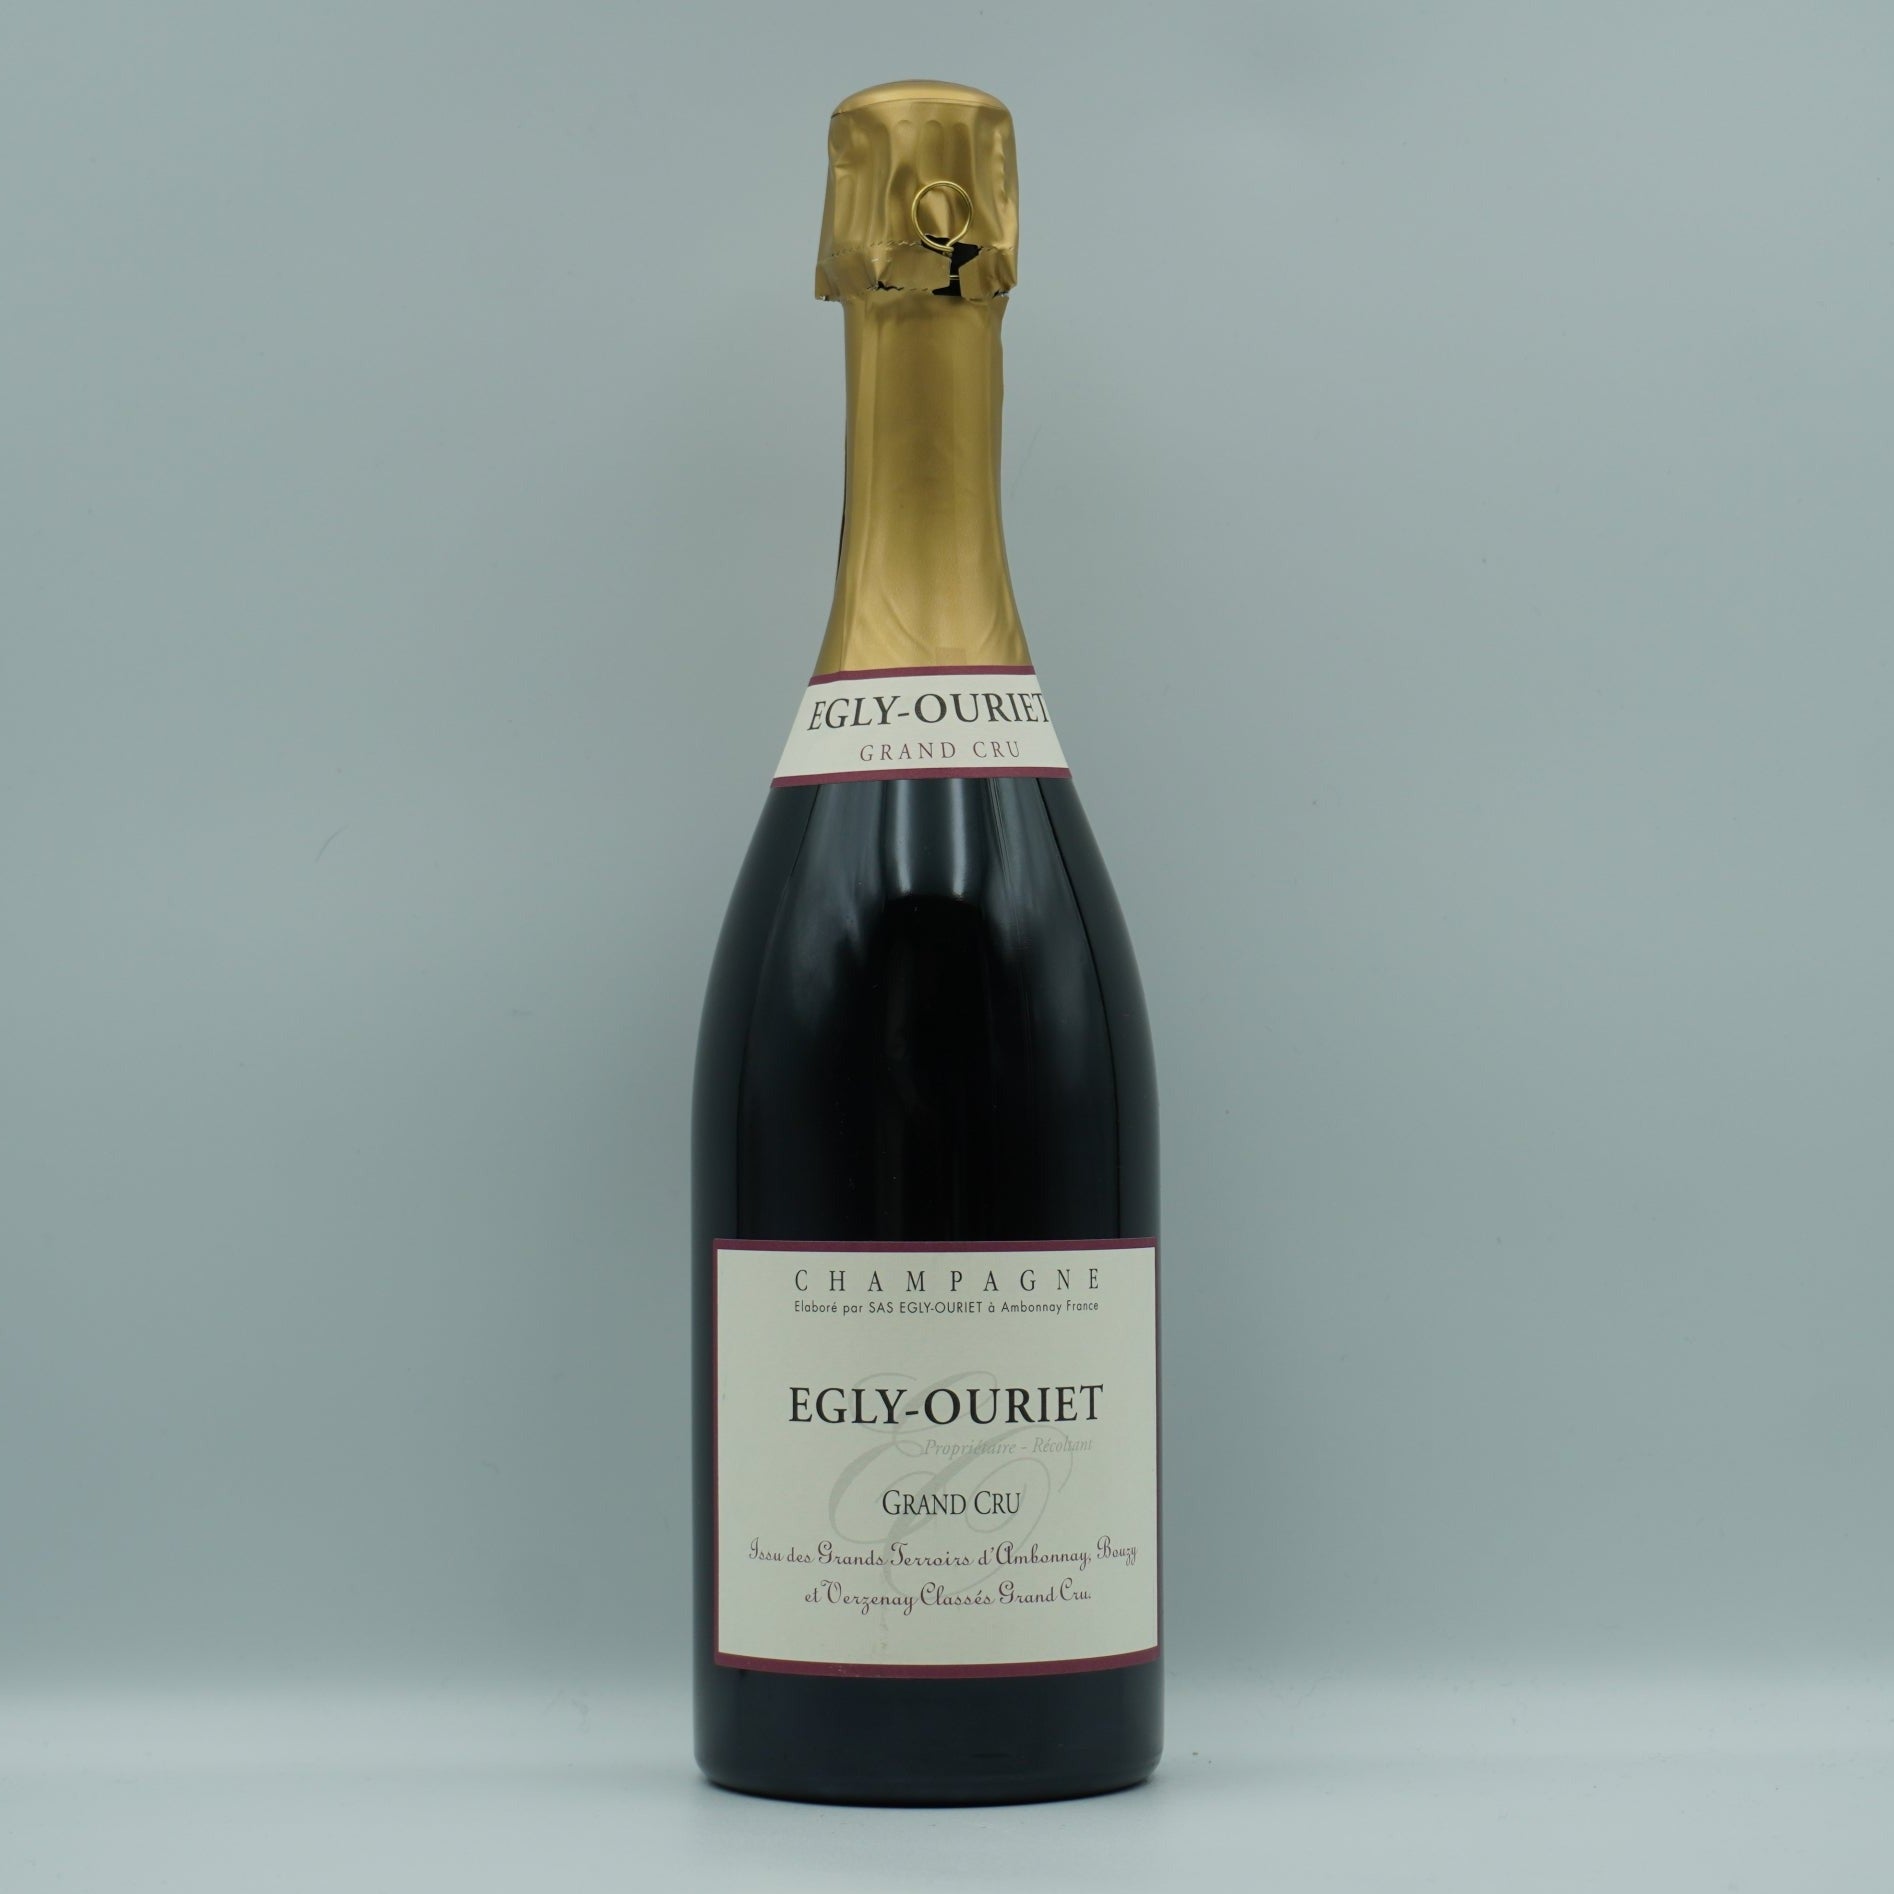 Egly-Ouriet Champagne, Grand Cru Brut Tradition NV